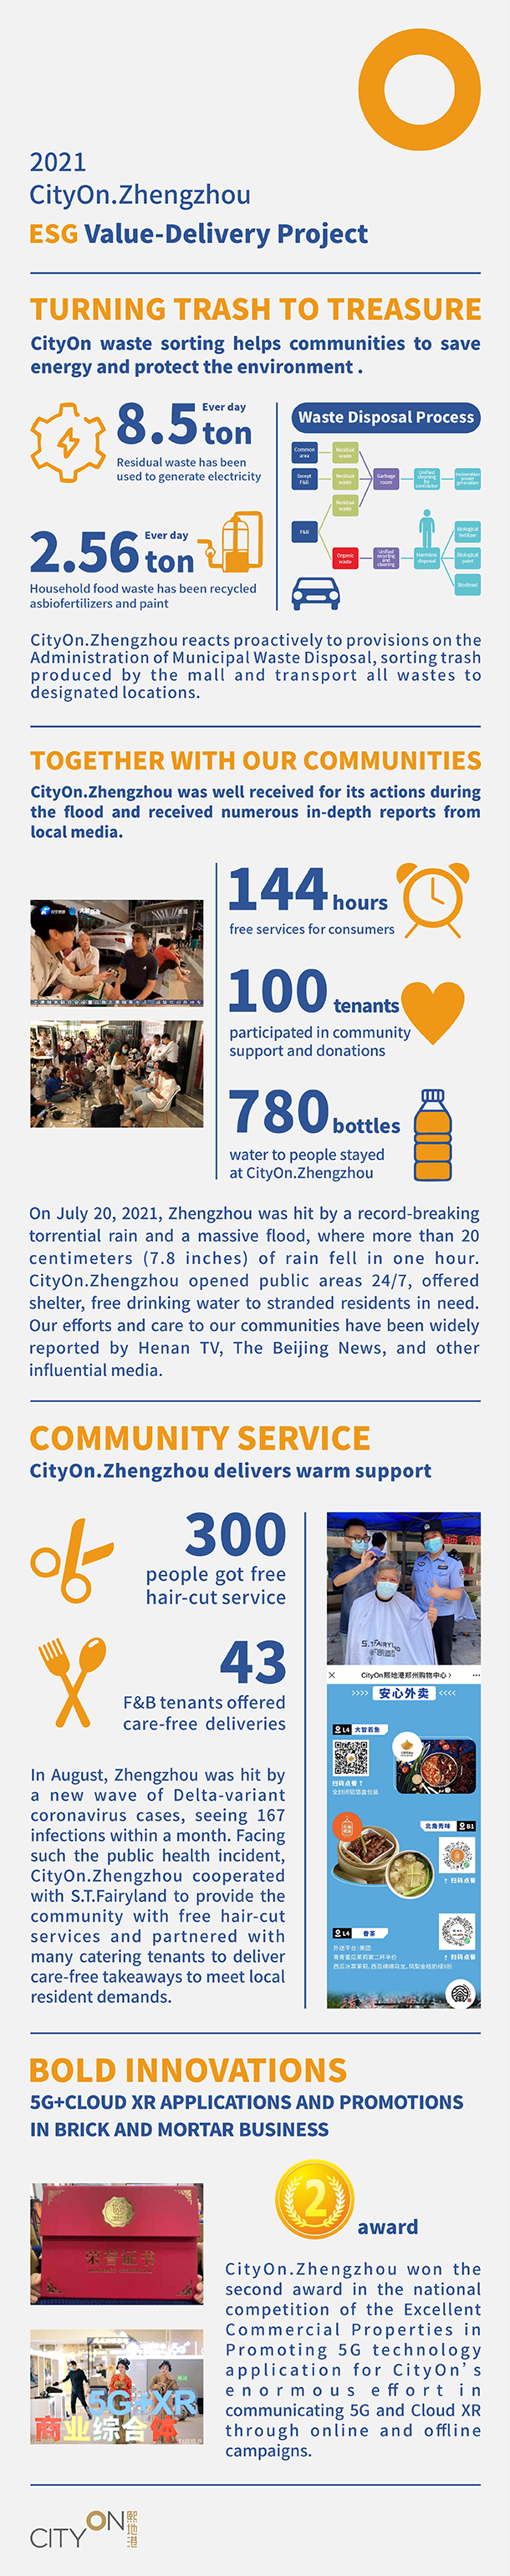 Environmental protection and goodwill community , ESG value transfers plan in action by CityOn. Zhengzhou